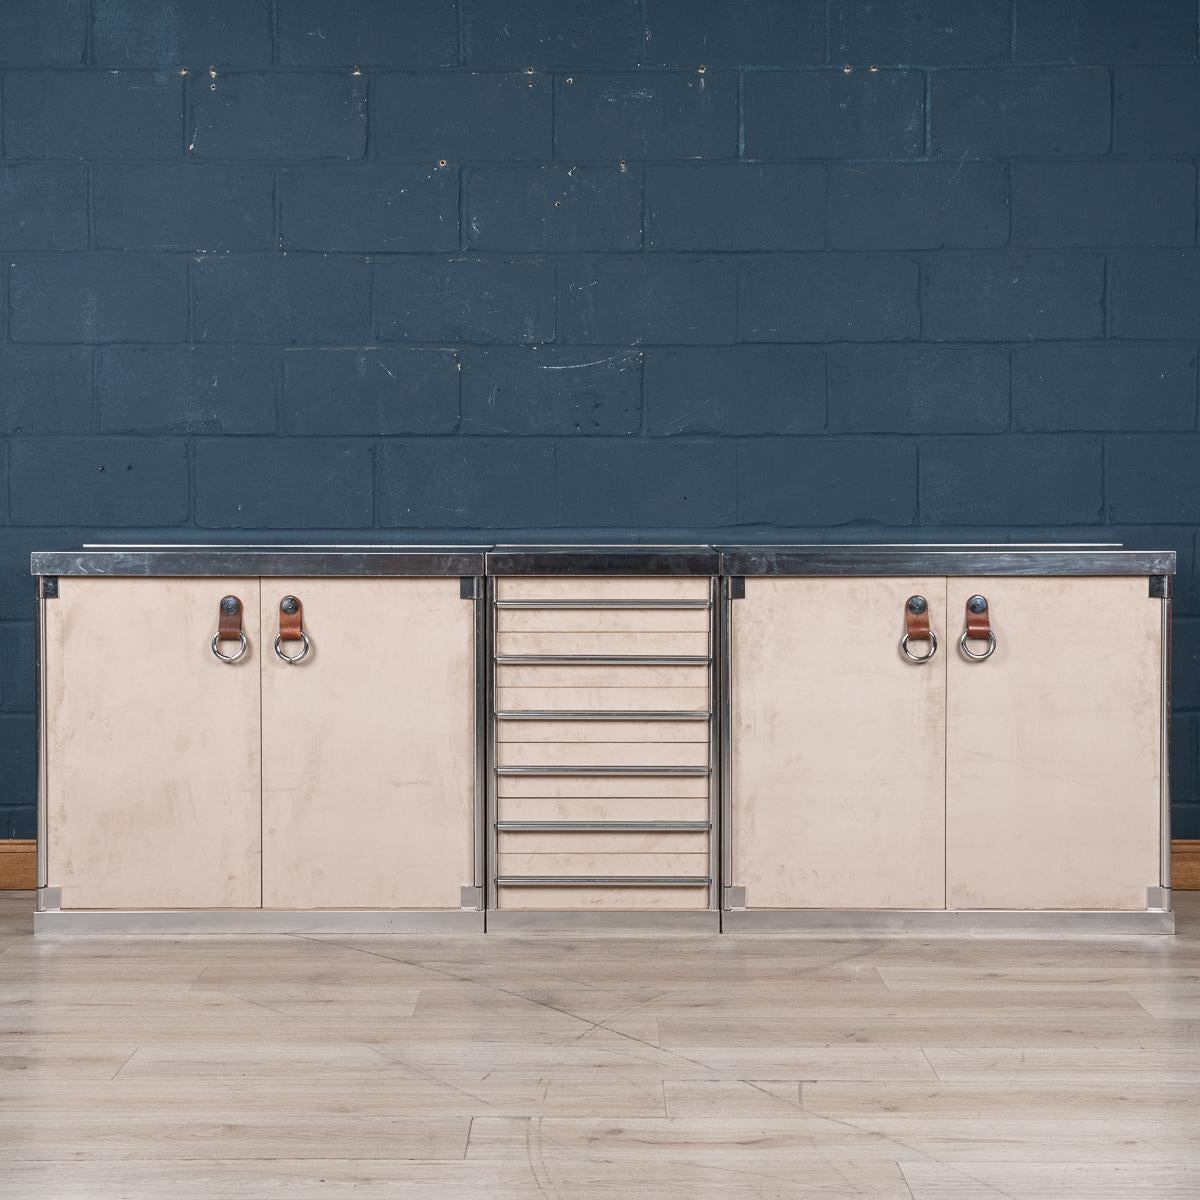 A superb three-piece sideboard consisting of two cabinets and one bank of drawers designed by Guido Faleschini for Hermes, France, circa 1970. Hermes barely needs any introduction: it is probably the most famous firm in the world known principally